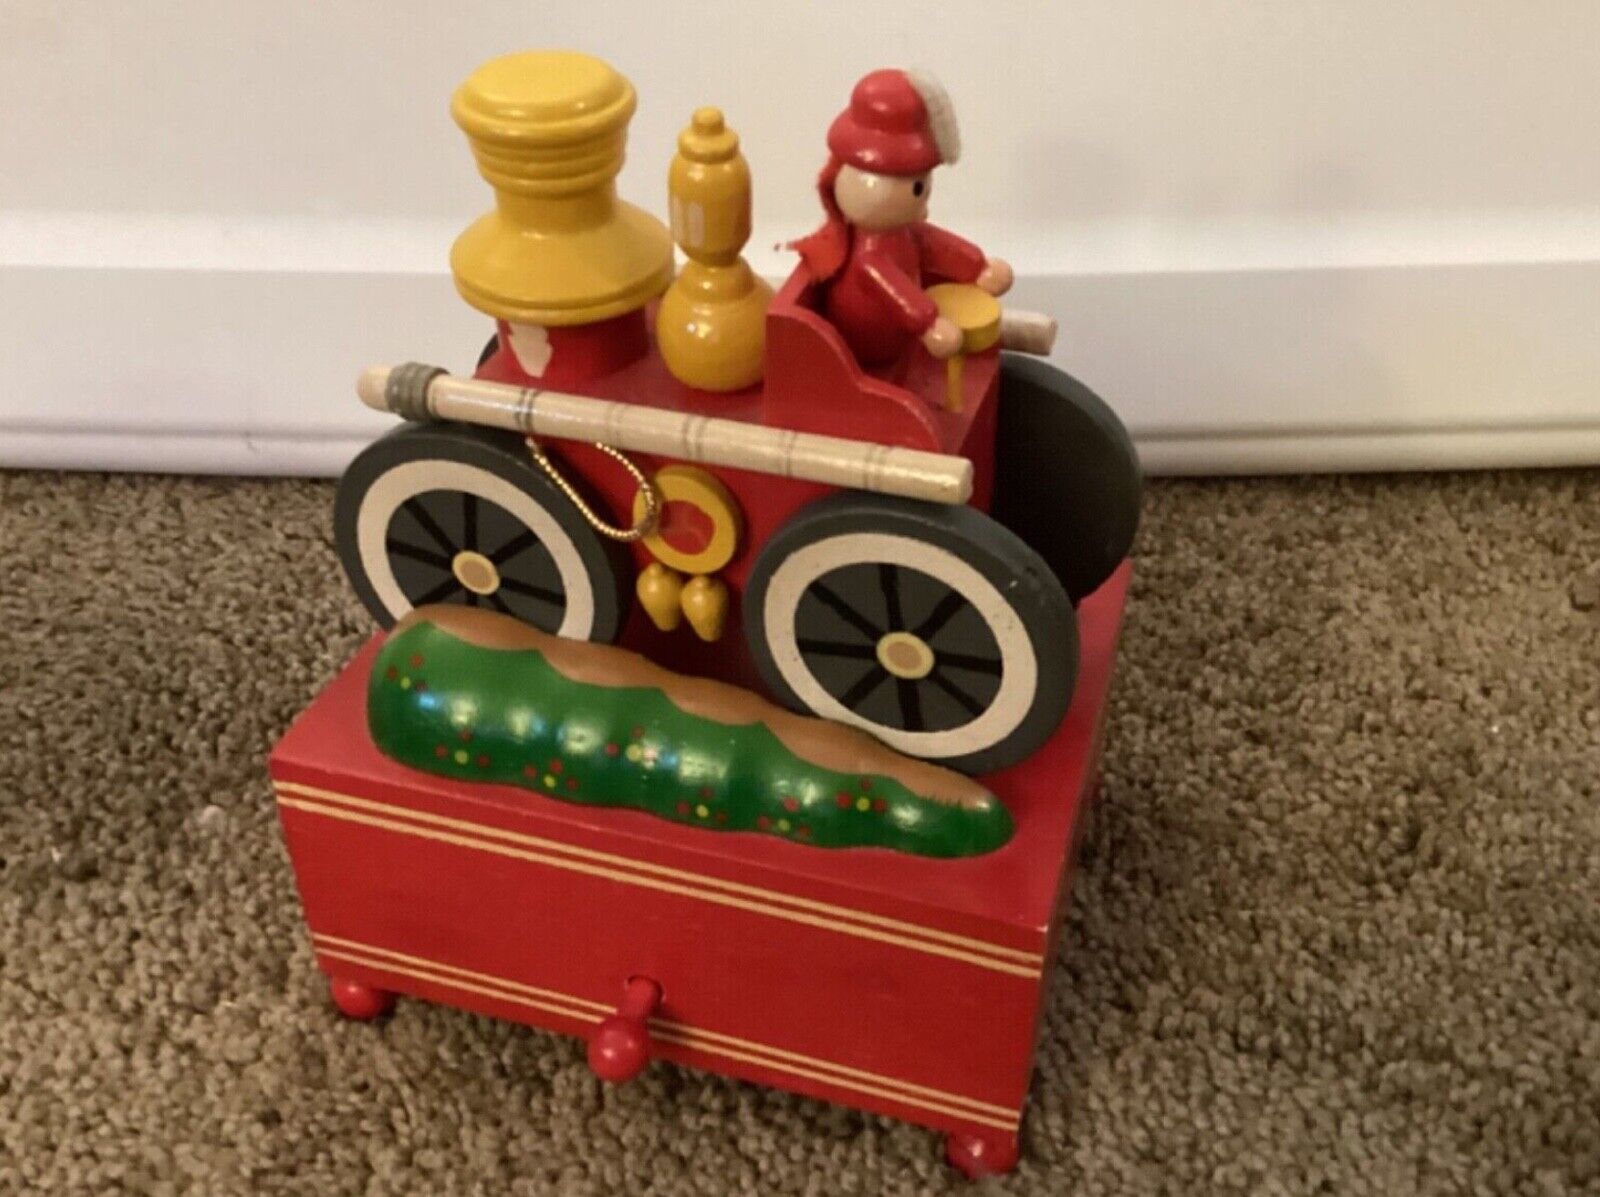 Music box Vintage wood firemen moving fire engine see pics works great unique